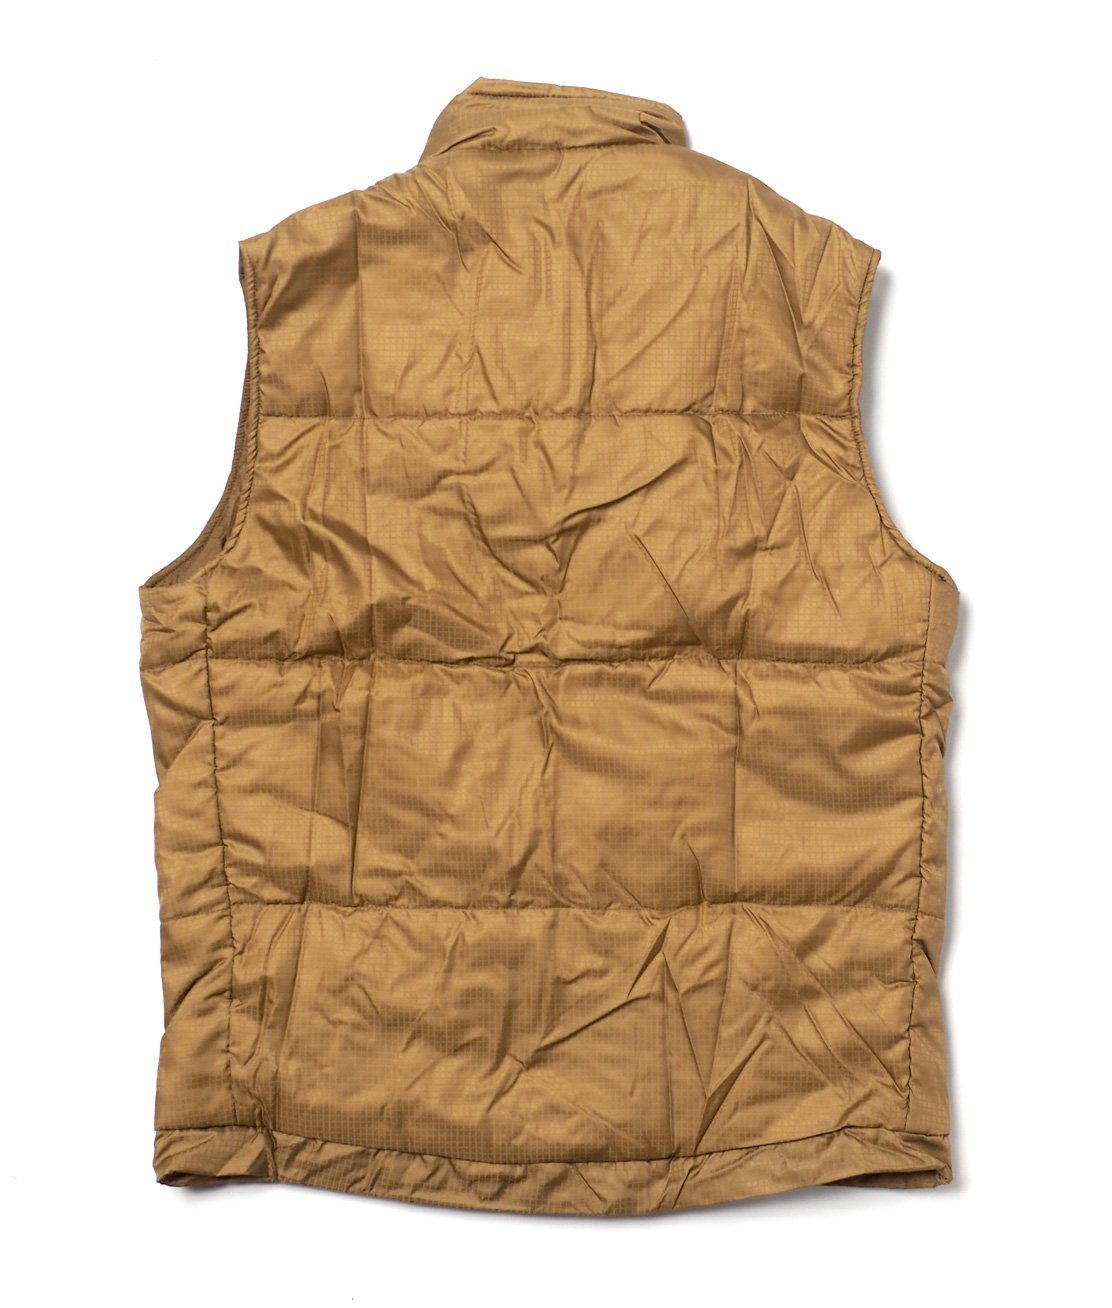 US MILITARY】BEYOND A7 HIGH LOFT COLD VEST - COYOTE 米軍 ビヨンド